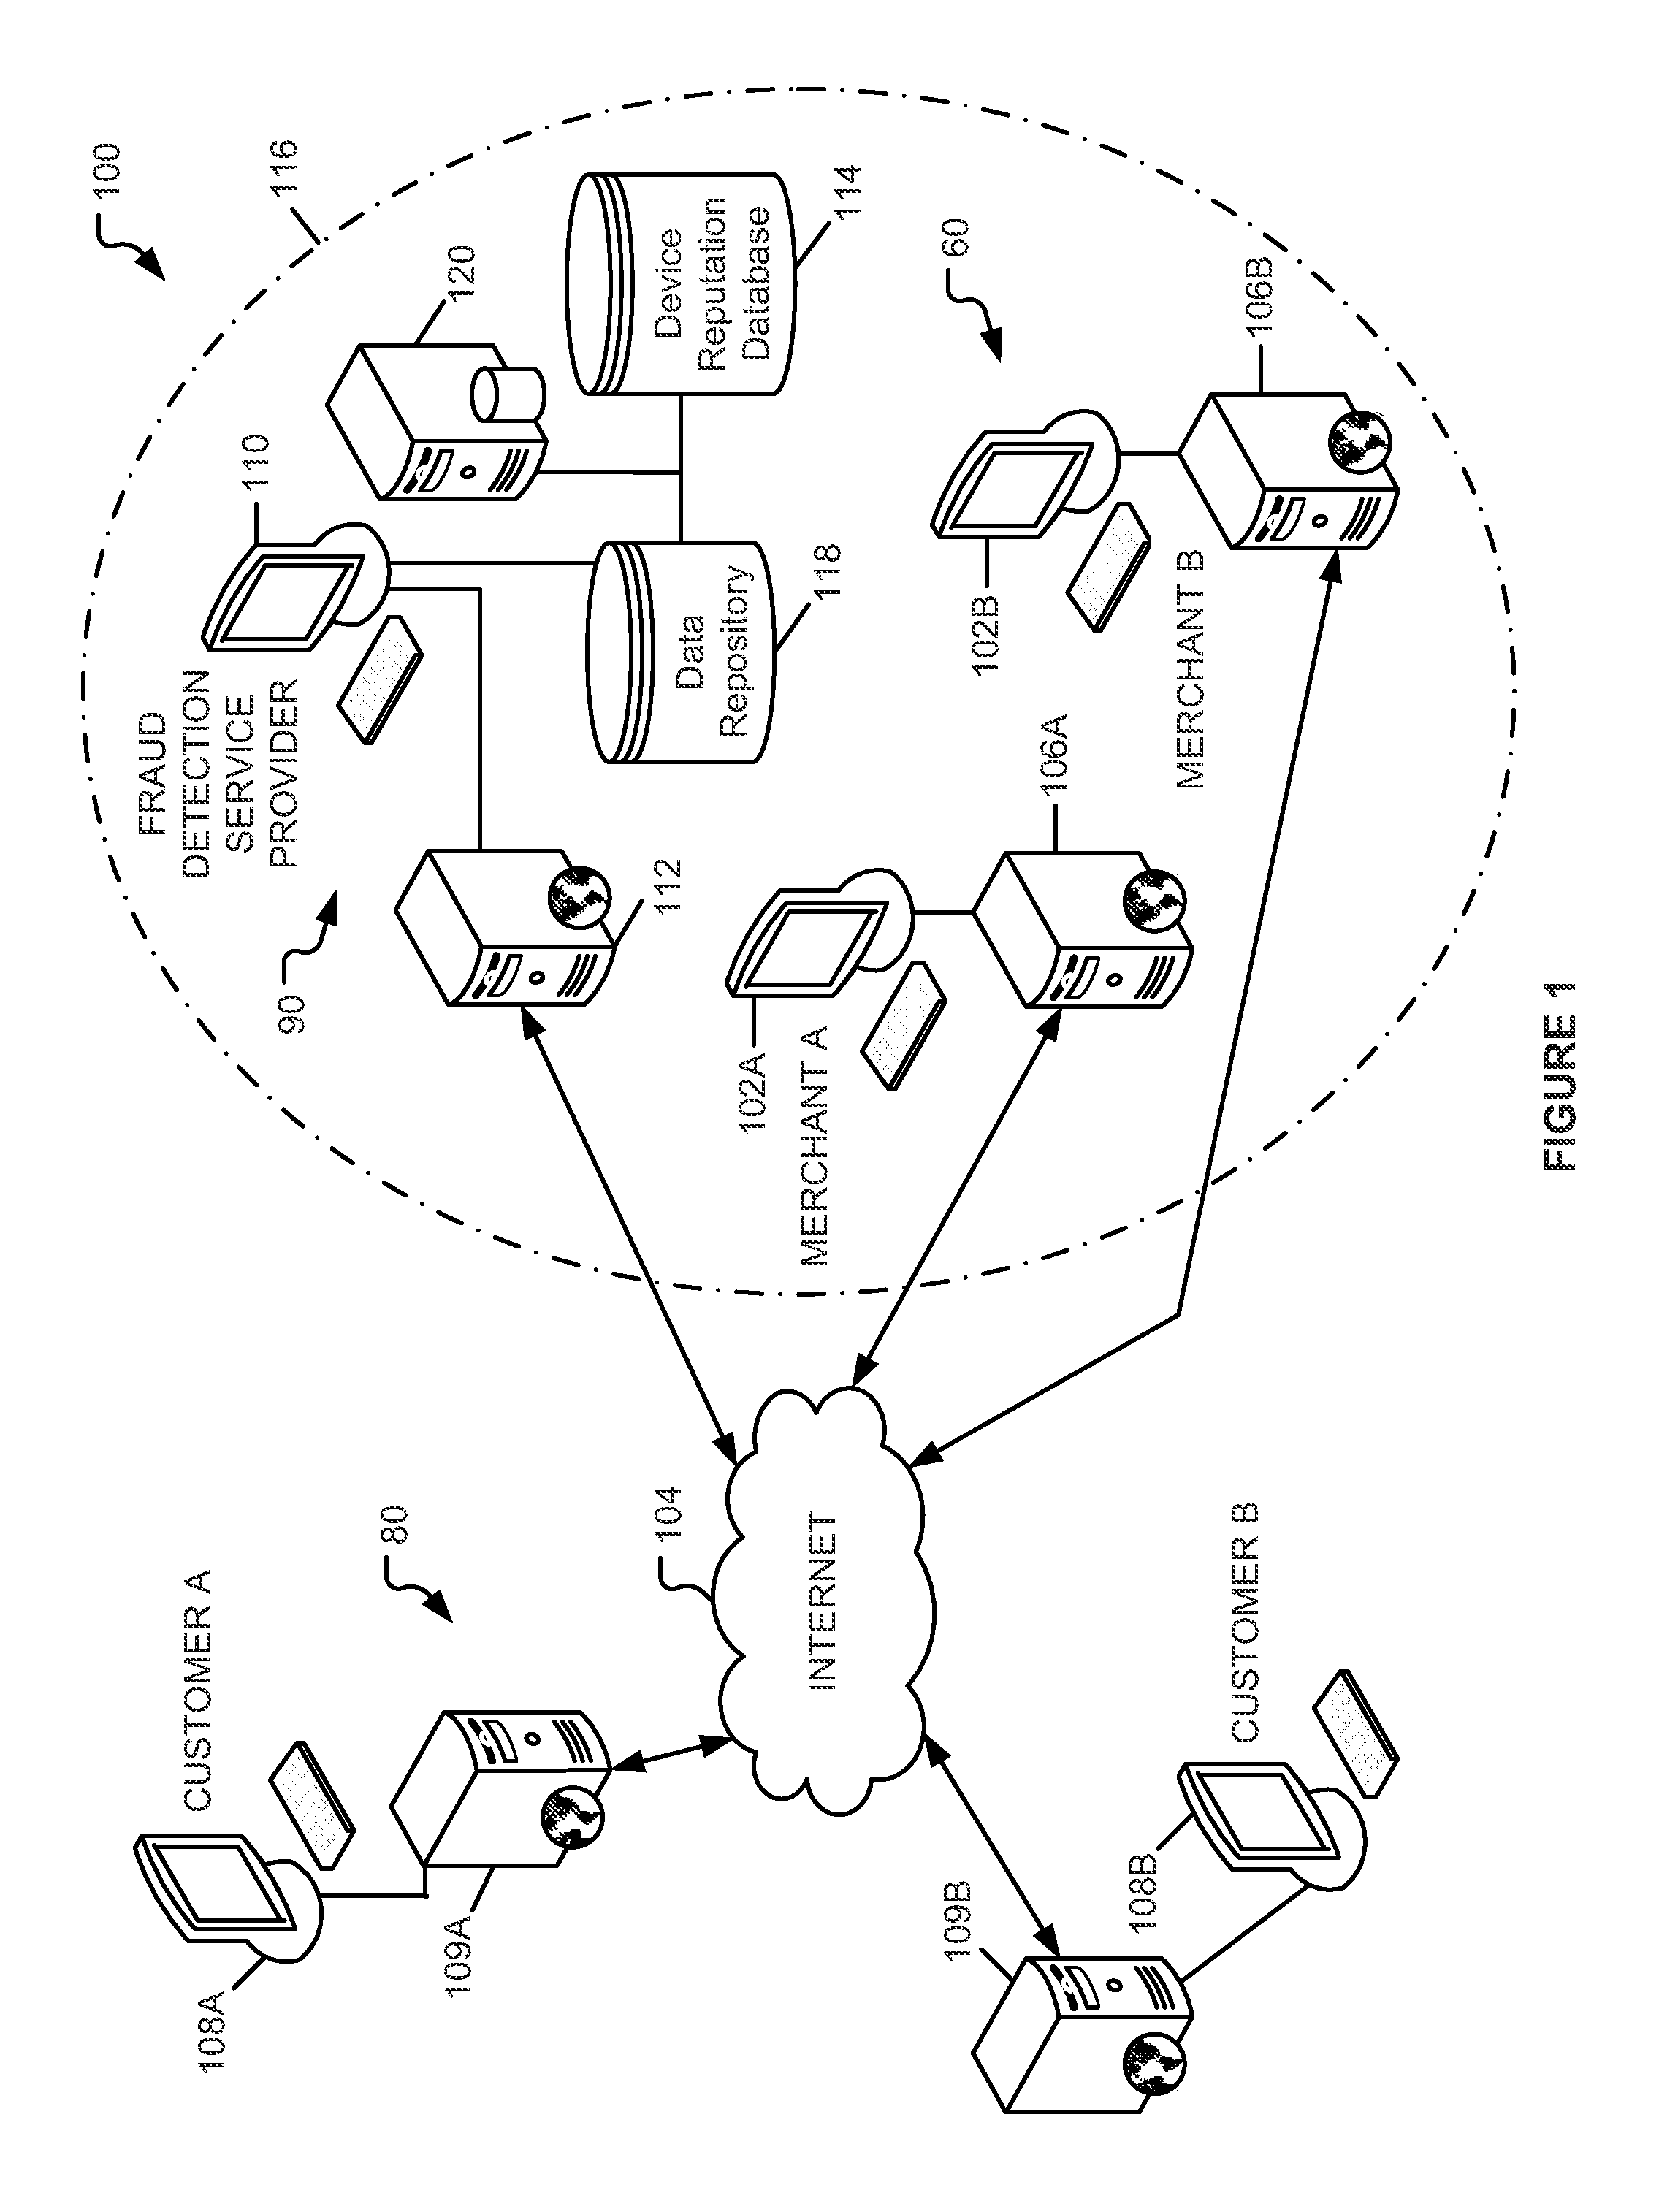 System and method for evaluating risk in fraud prevention